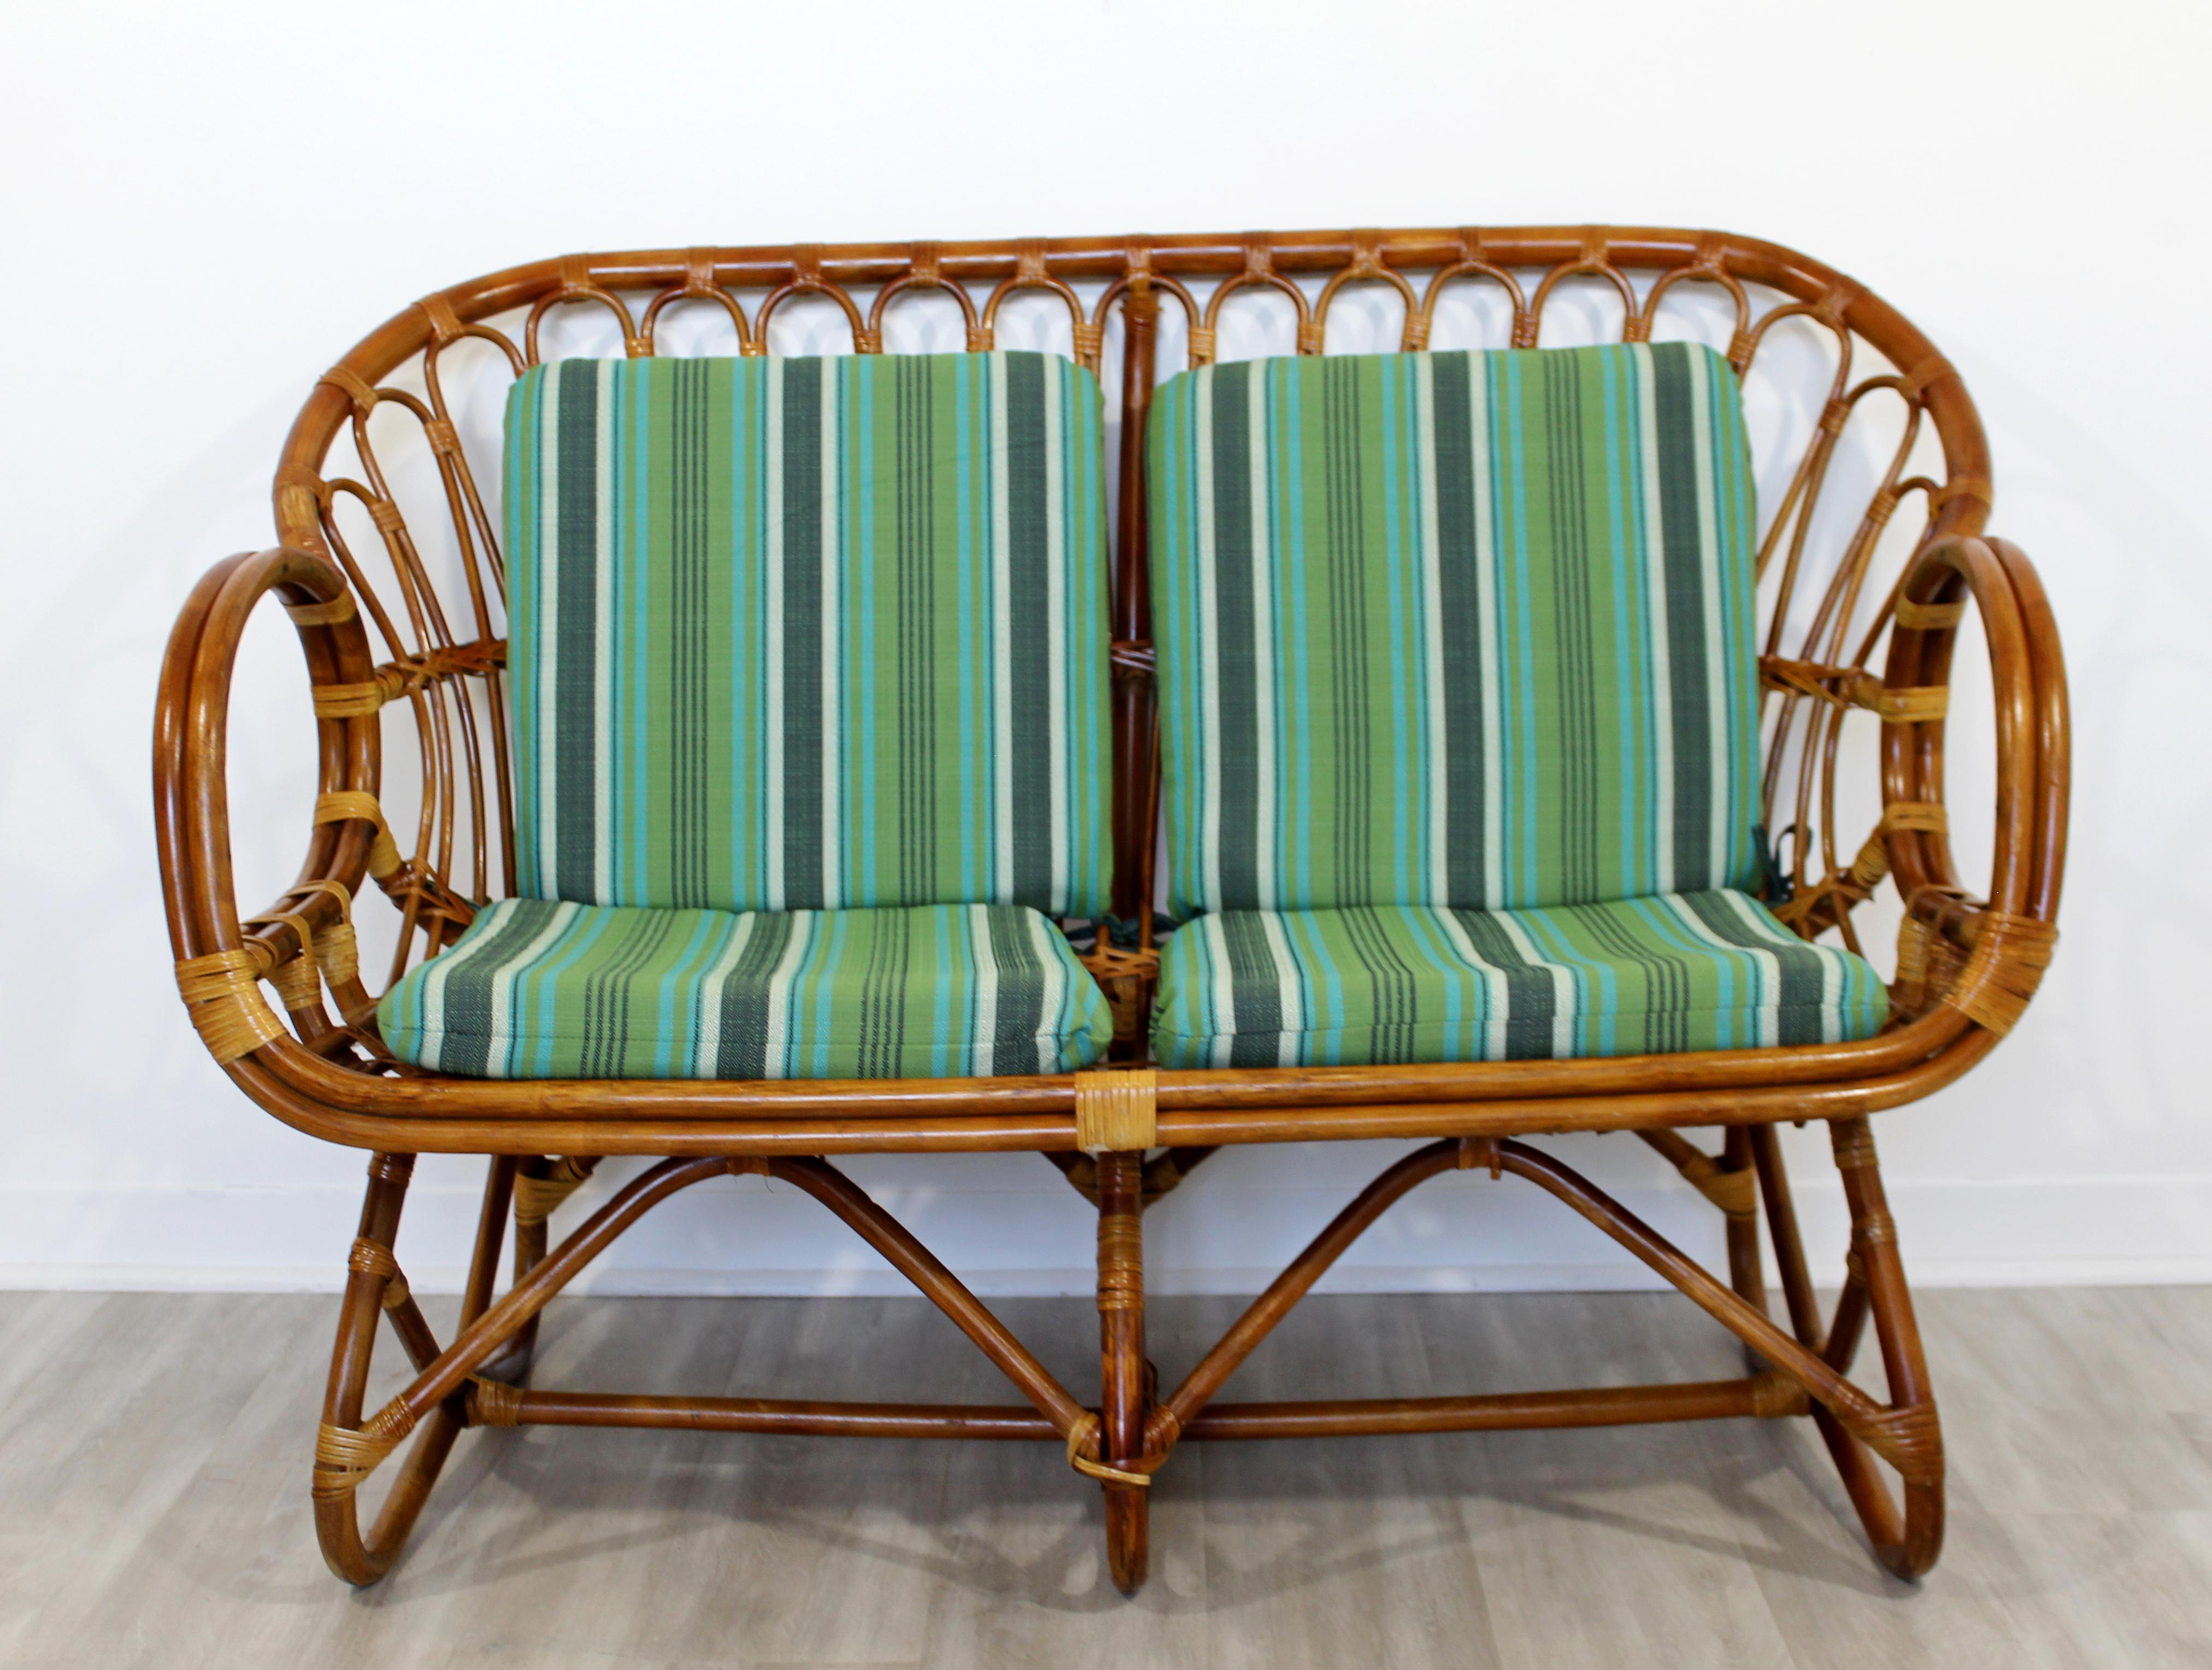 For your consideration is a sculptural settee loveseat, made of bamboo rattan, by Franco Albini, circa 1960s. In very good vintage condition. The cushions, are new. The dimensions are 49